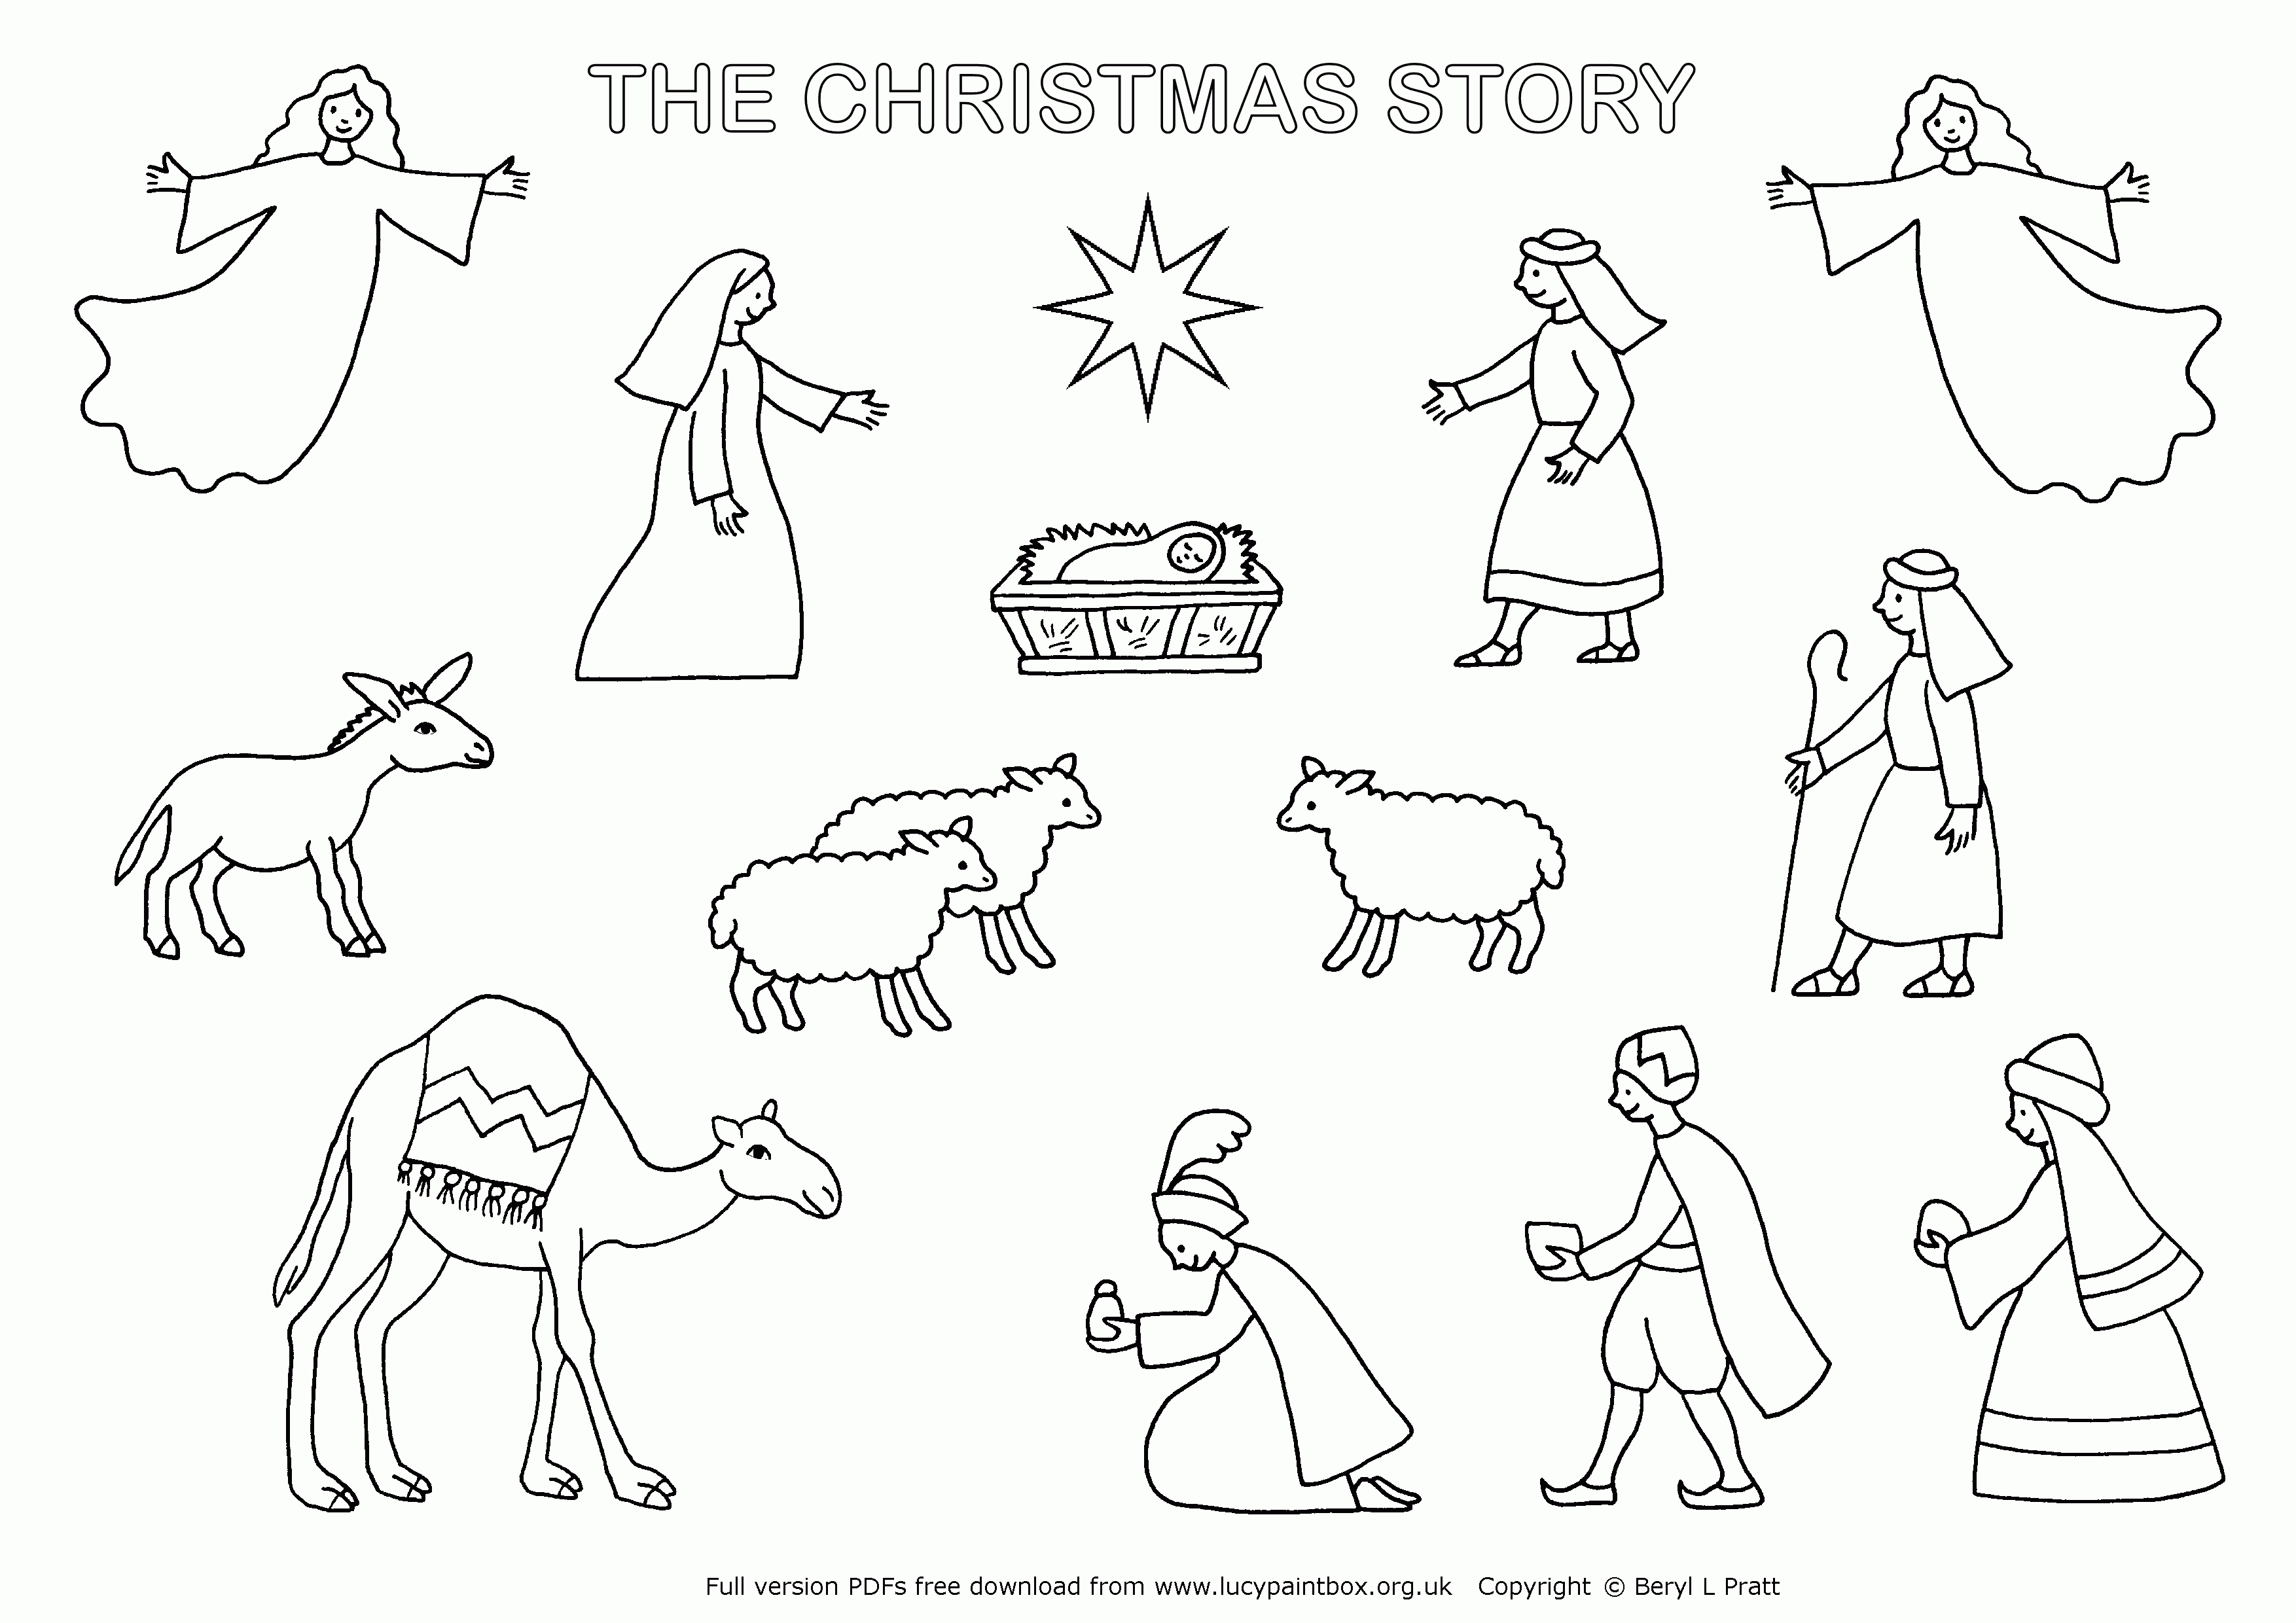 Lucypaintbox Org Uk Has A Lovely Nativity Scene That Also Stands Up - Free Printable Nativity Story Coloring Pages